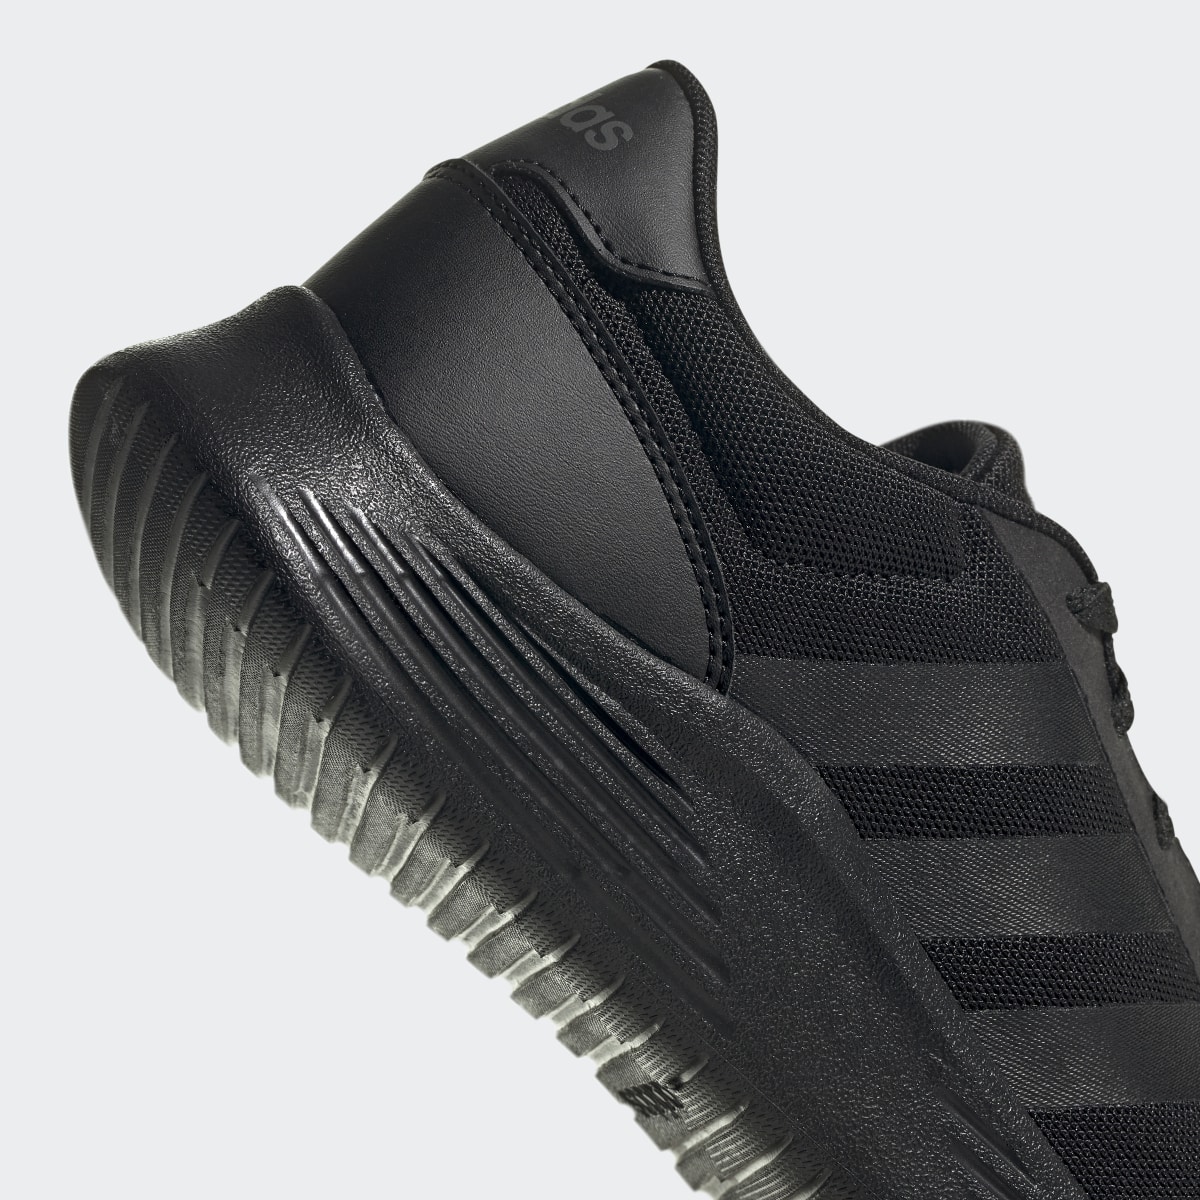 Adidas Lite Racer 2.0 Shoes. 9